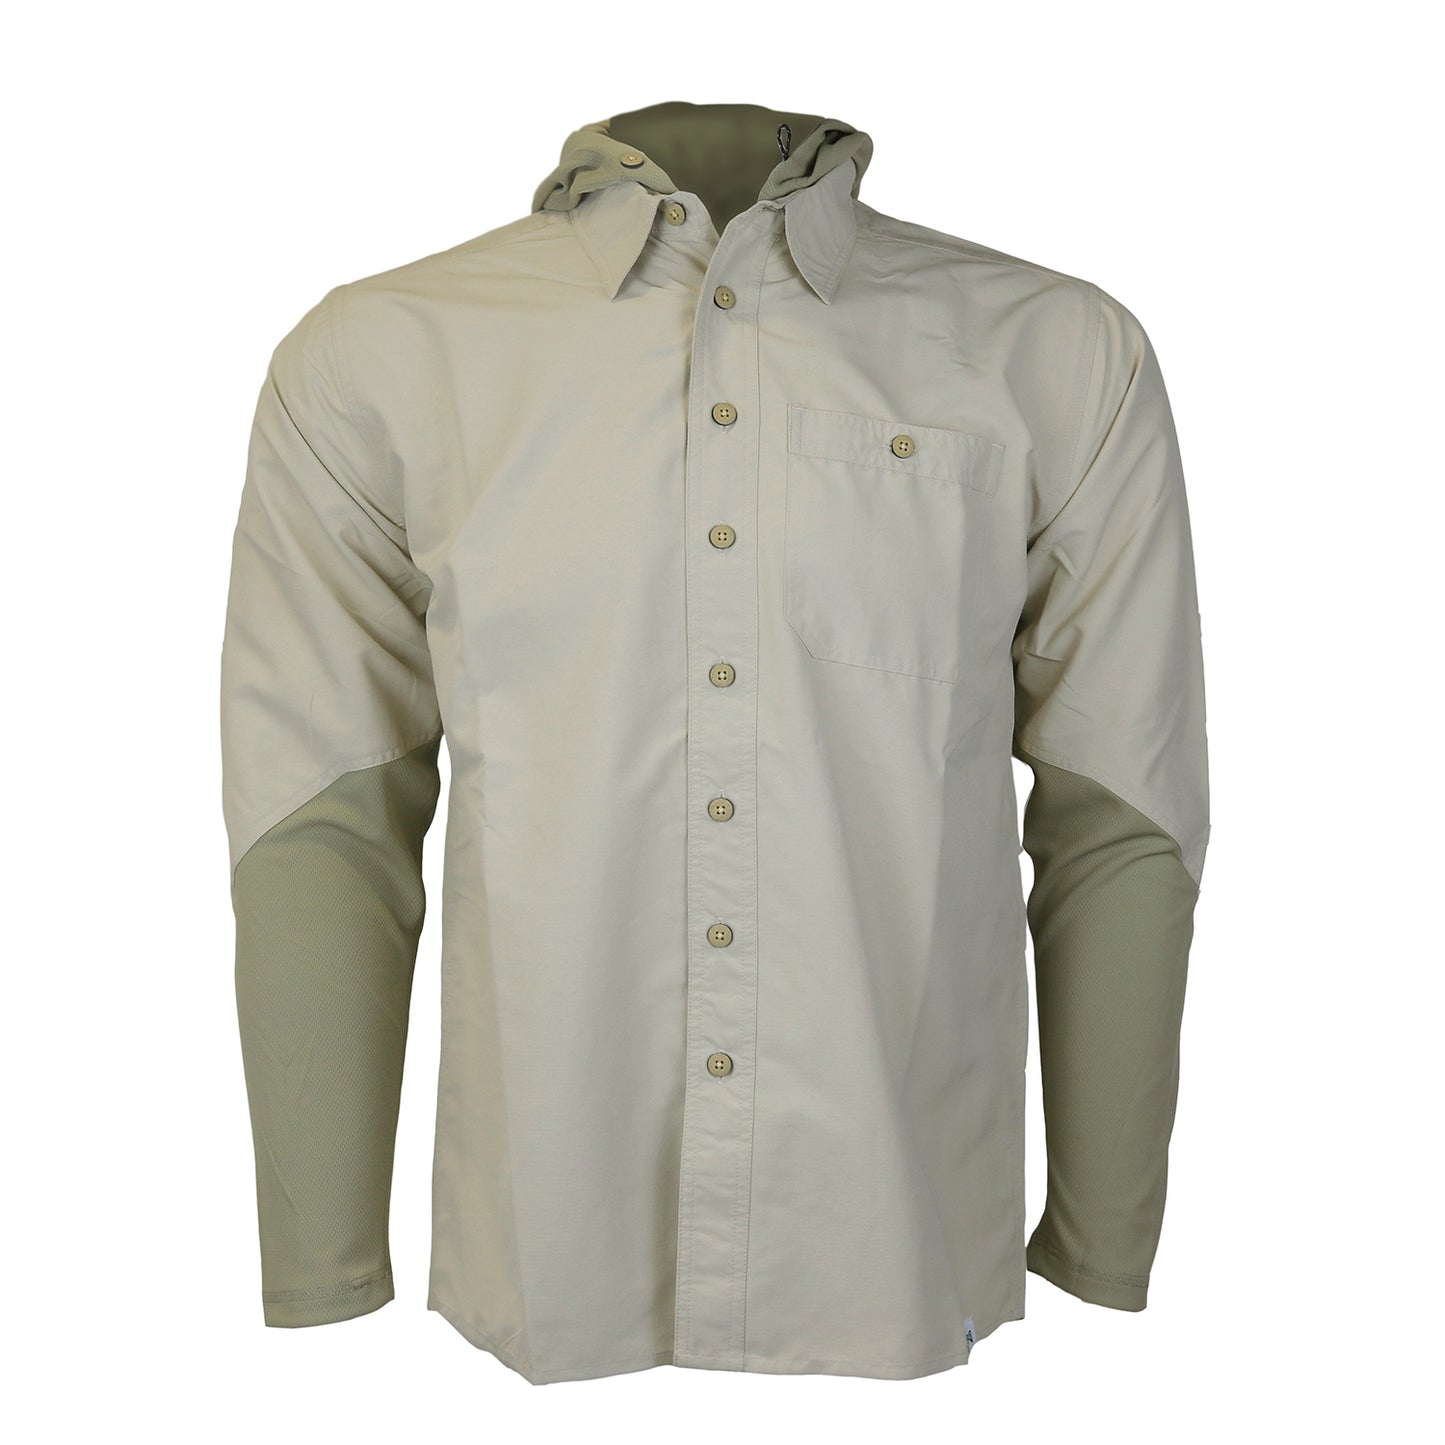 Front view of a tan button down shirt with crew sleeves, a collar and a hood down over the back.